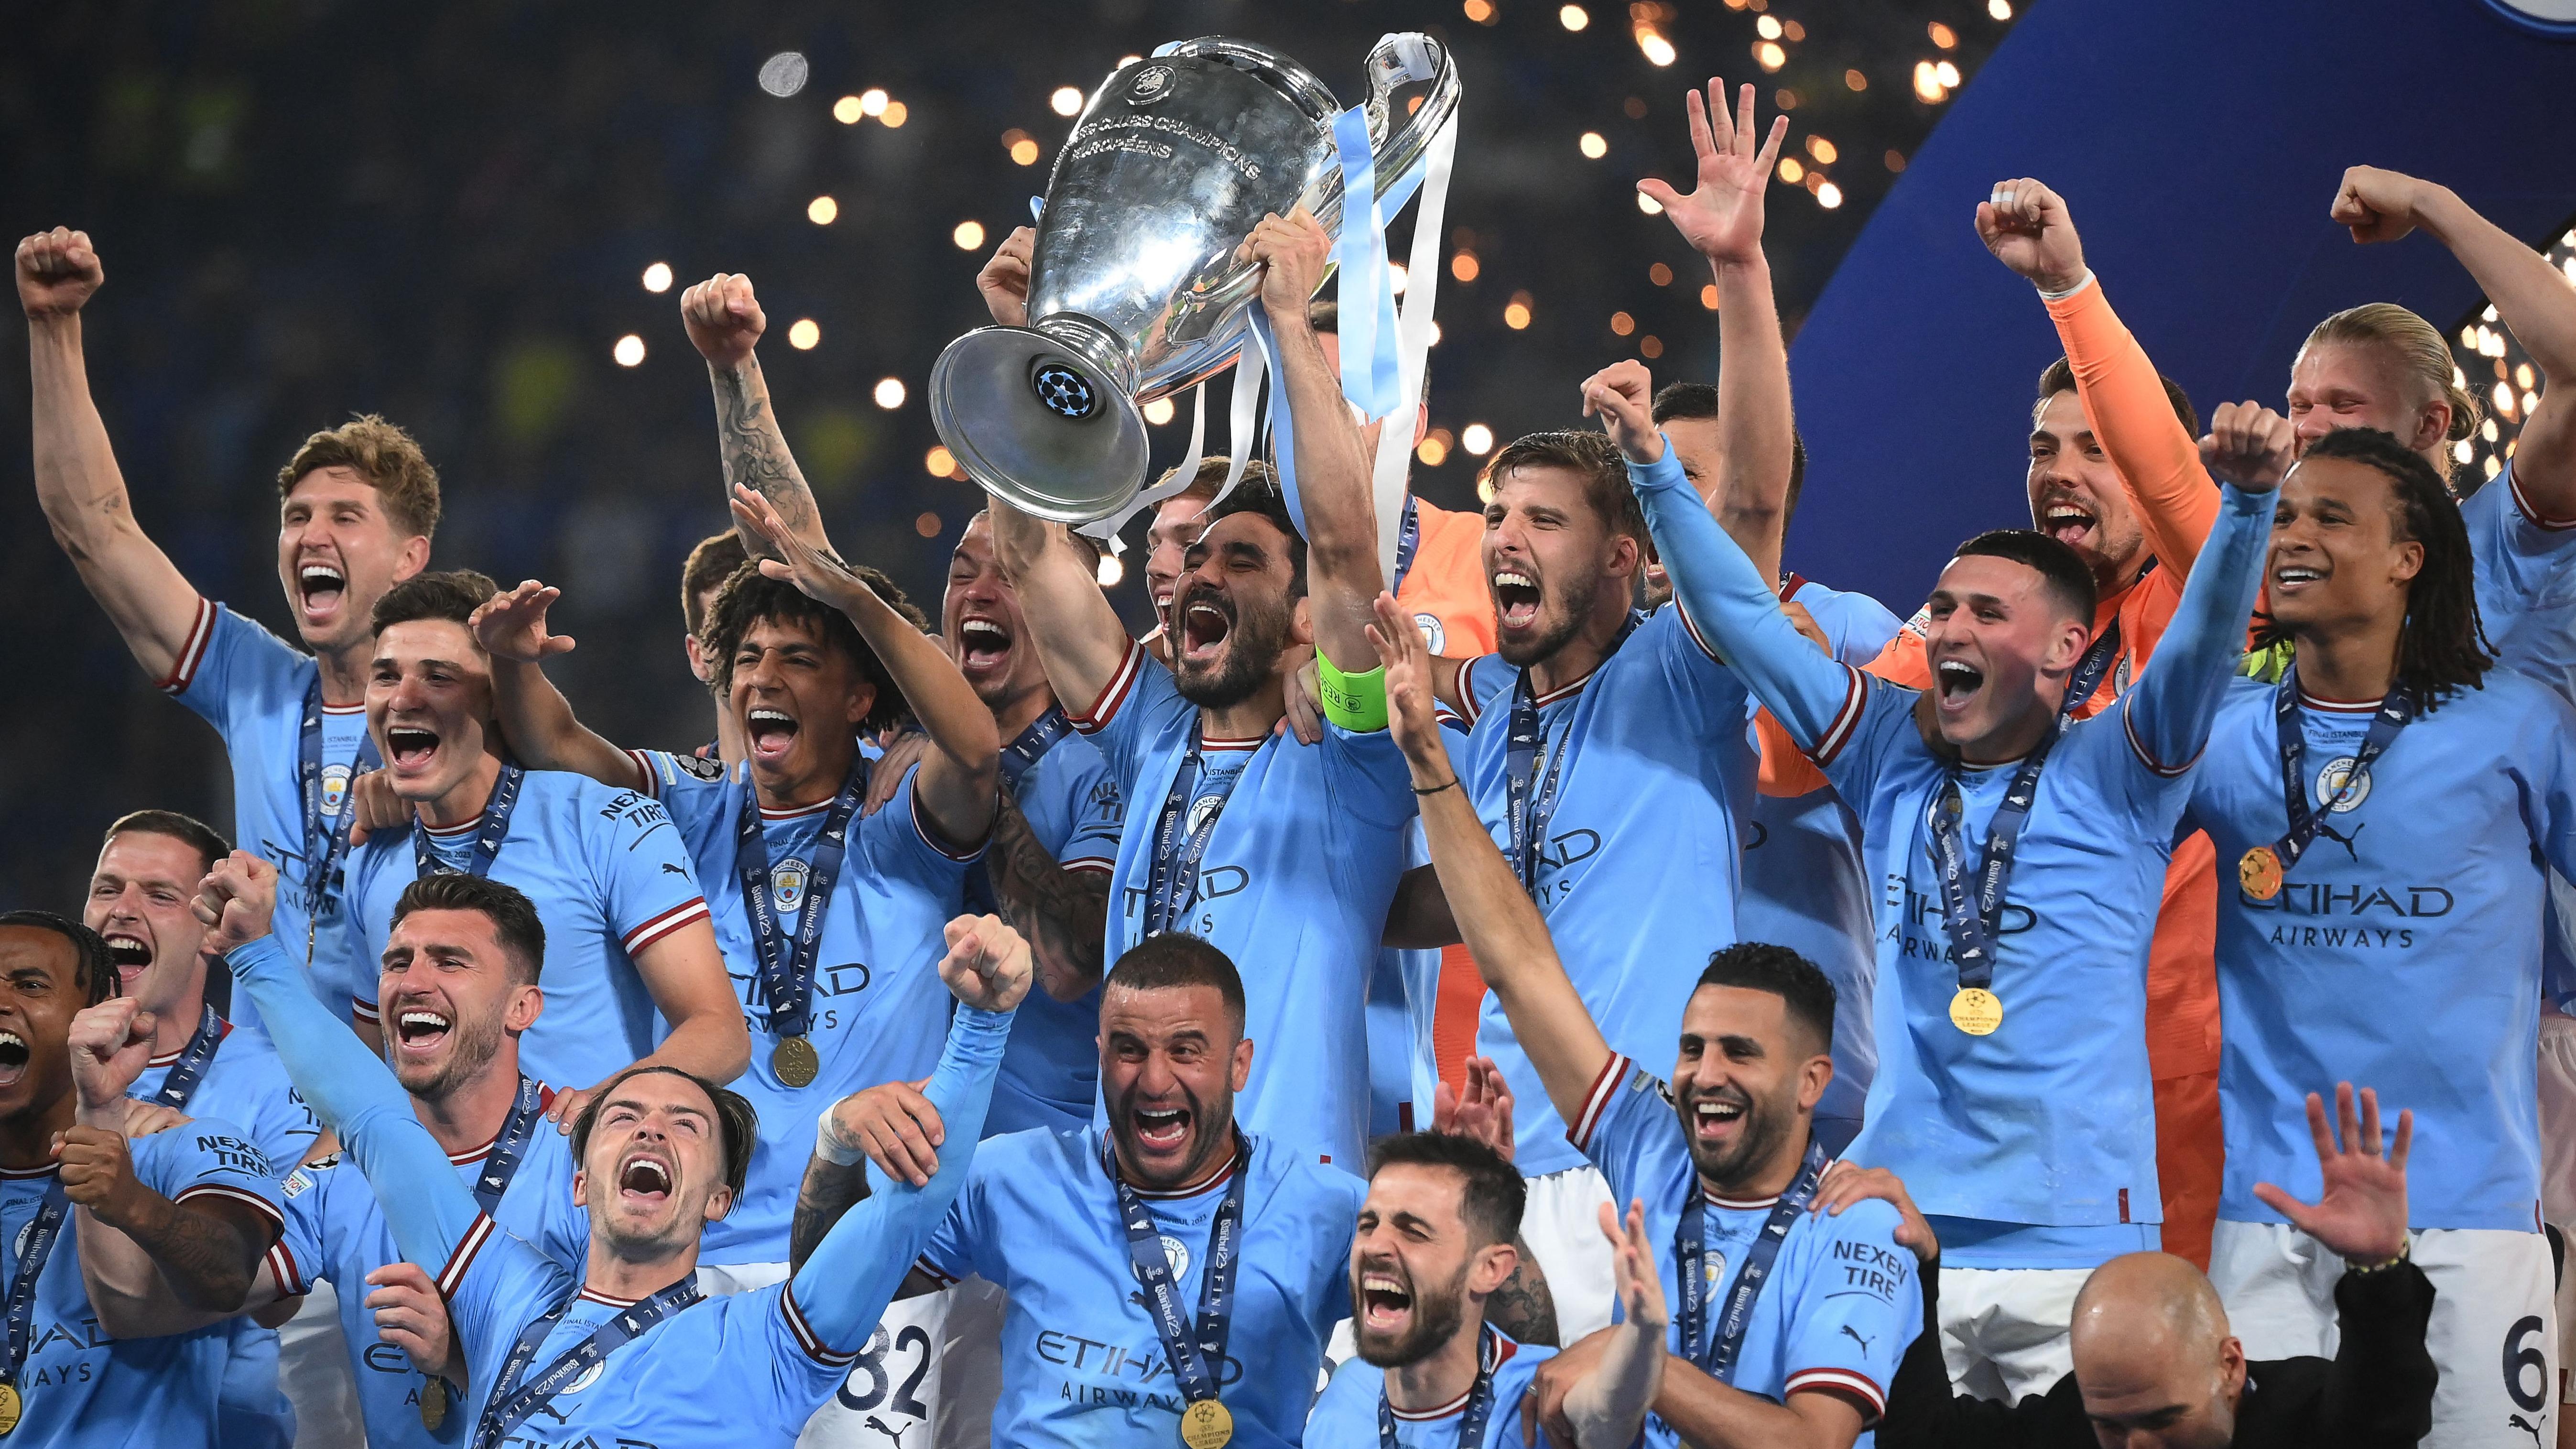 Greatest Champions League team in history? Manchester City stake their claim after clinching treble in 2023